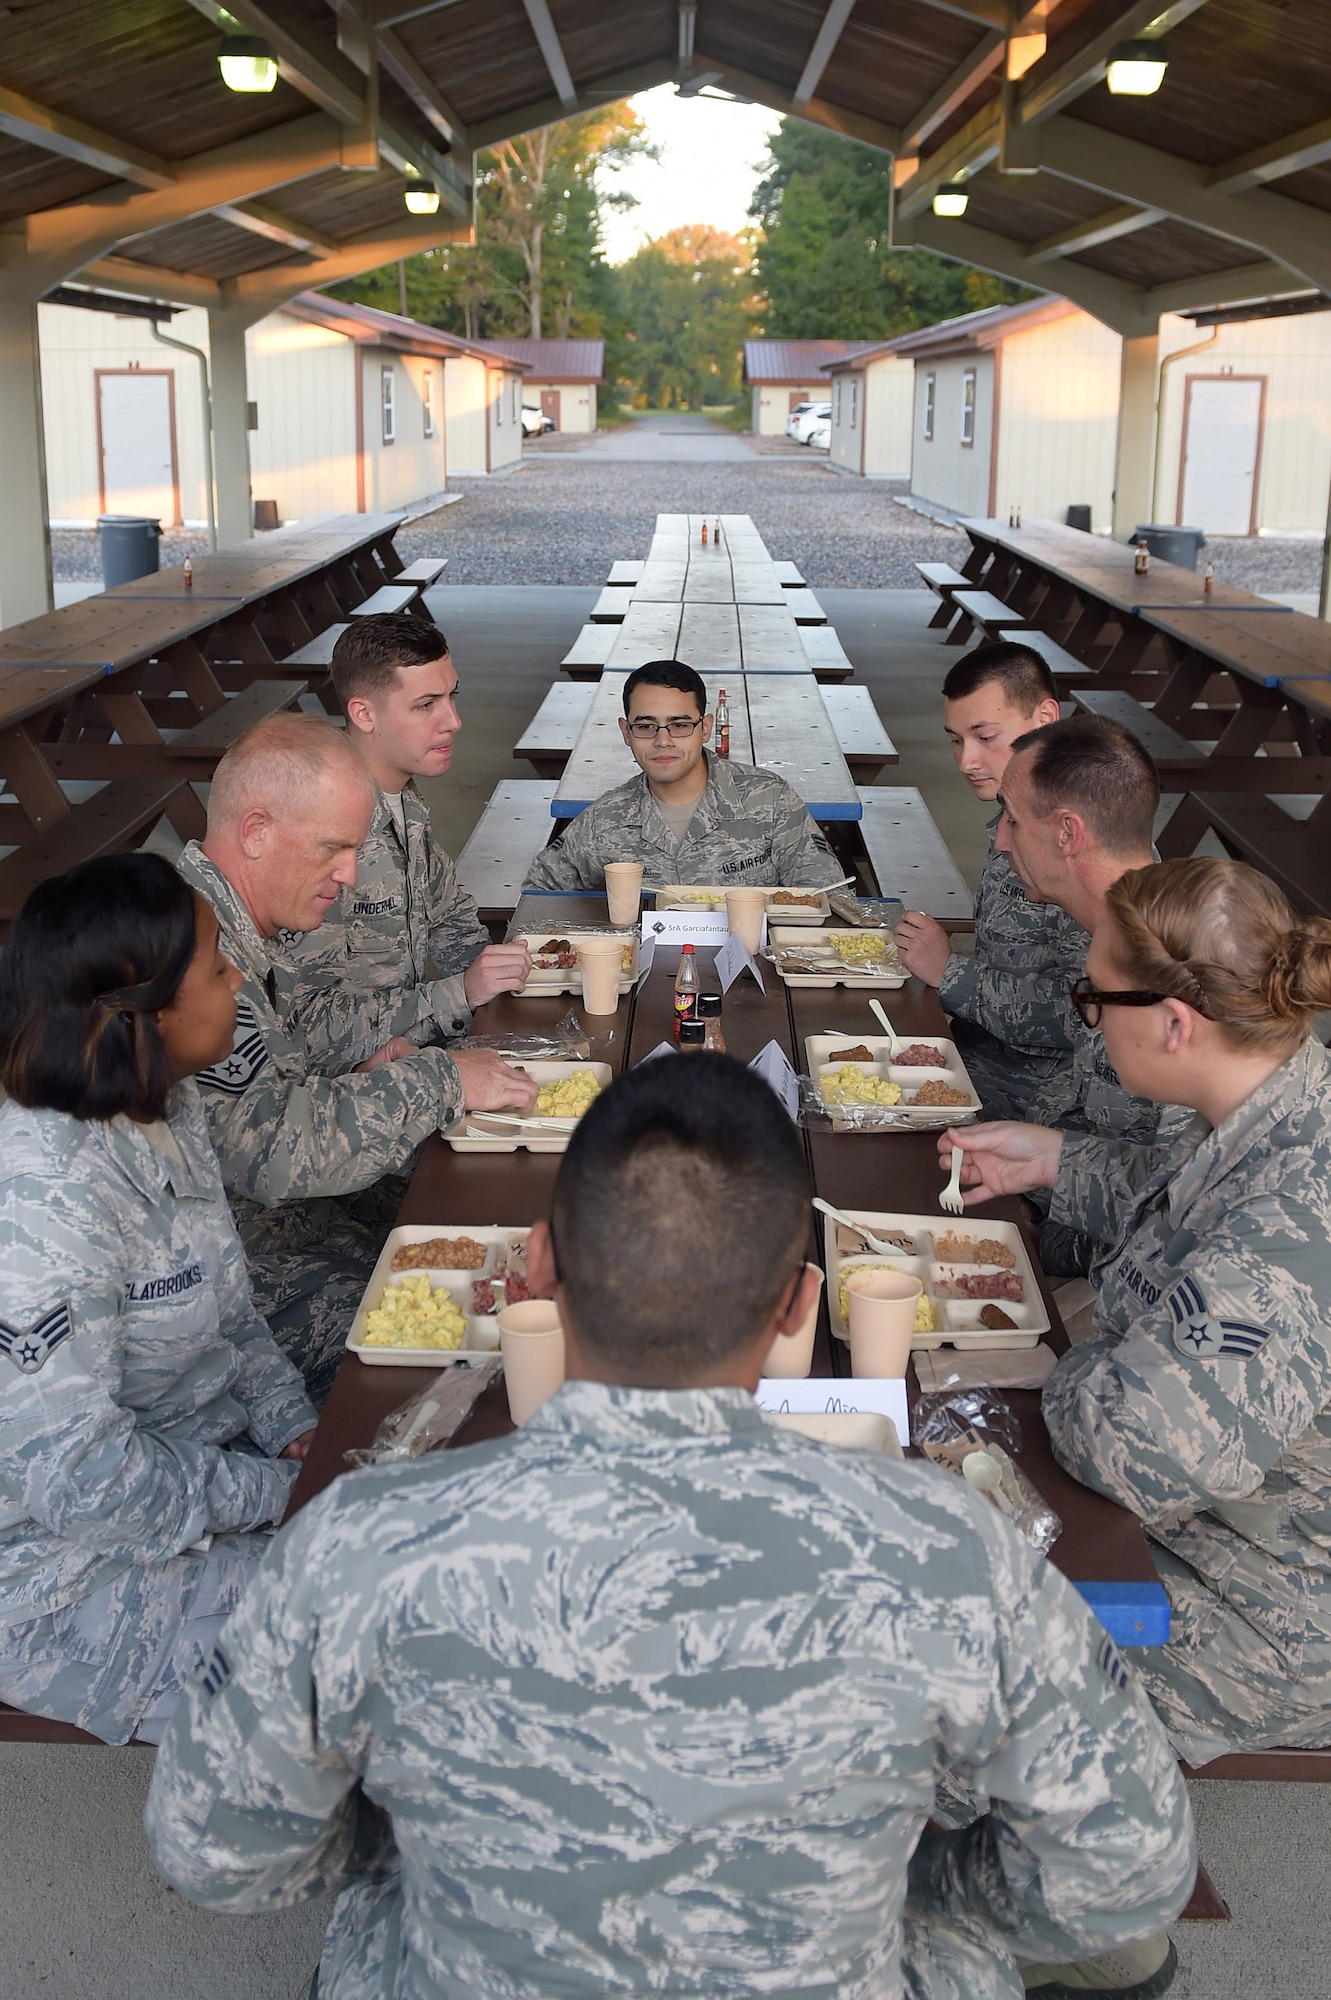 Members of the 633rd Medical Group eat breakfast with U.S. Air Force Maj. Gen. Scott Zobrist, 9th Air Force commander, and Chief Master Sgt. Frank Batten, 9th Air Force command chief, during a visit at Joint Base Langley-Eusits, Va., Oct. 18, 2016. The medical Airmen met with the command team during an exercise at Raptor town with their Expeditionary Medical Support team. (U.S. Air Force photo by Senior Airman Kimberly Nagle)